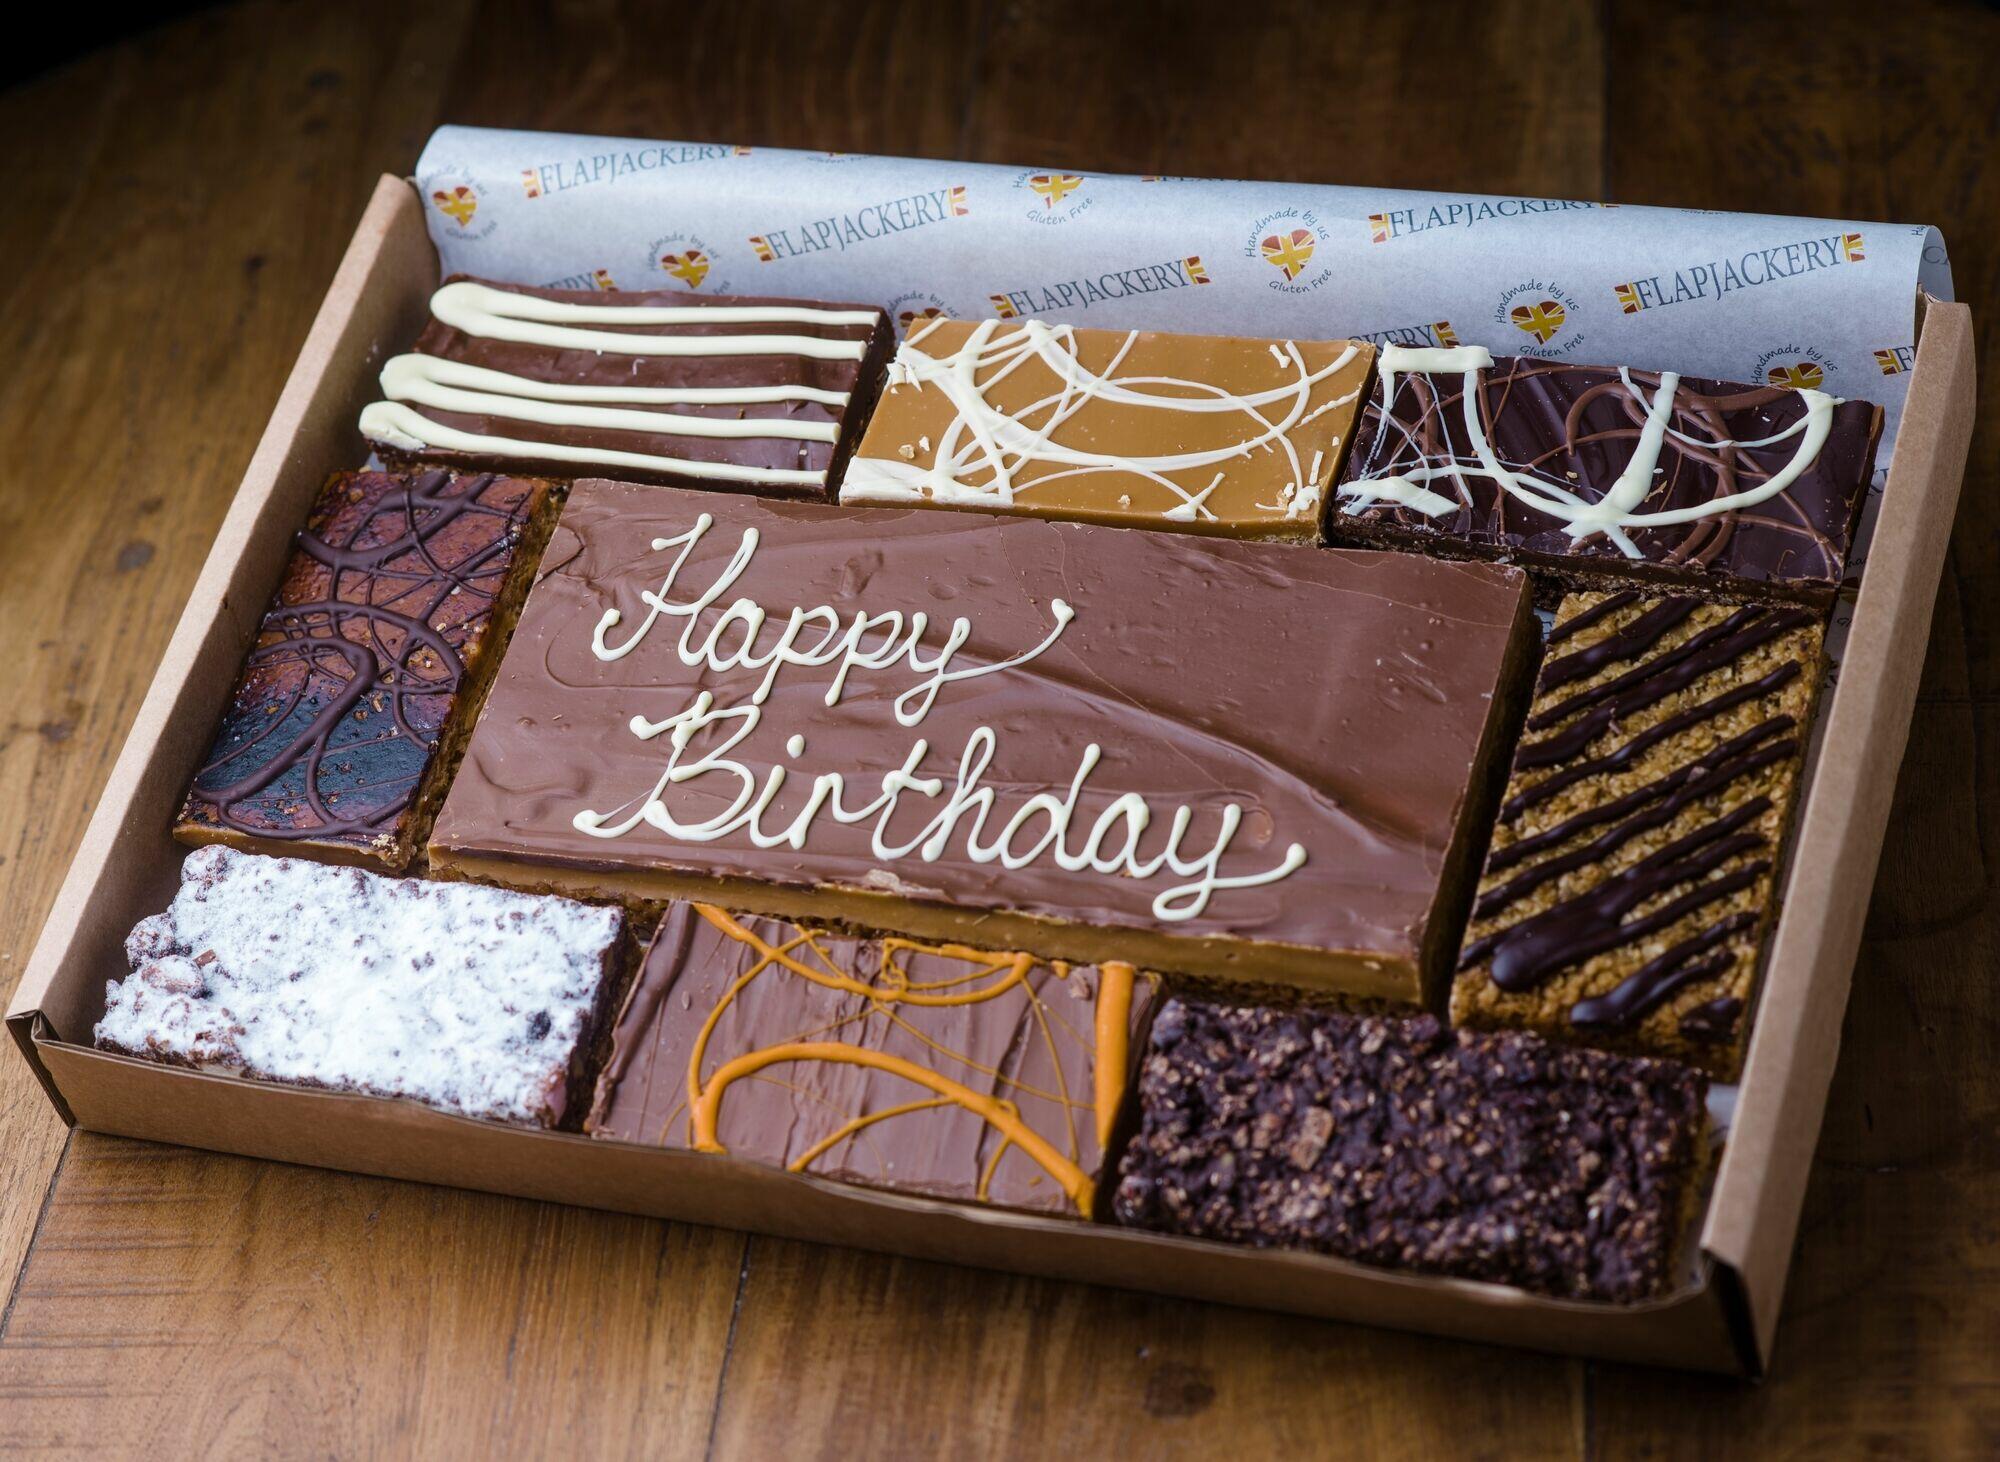 Happy Birthday Message Flapjack Box - Millionaires Message Plaque With 8 Additional Flapjacks